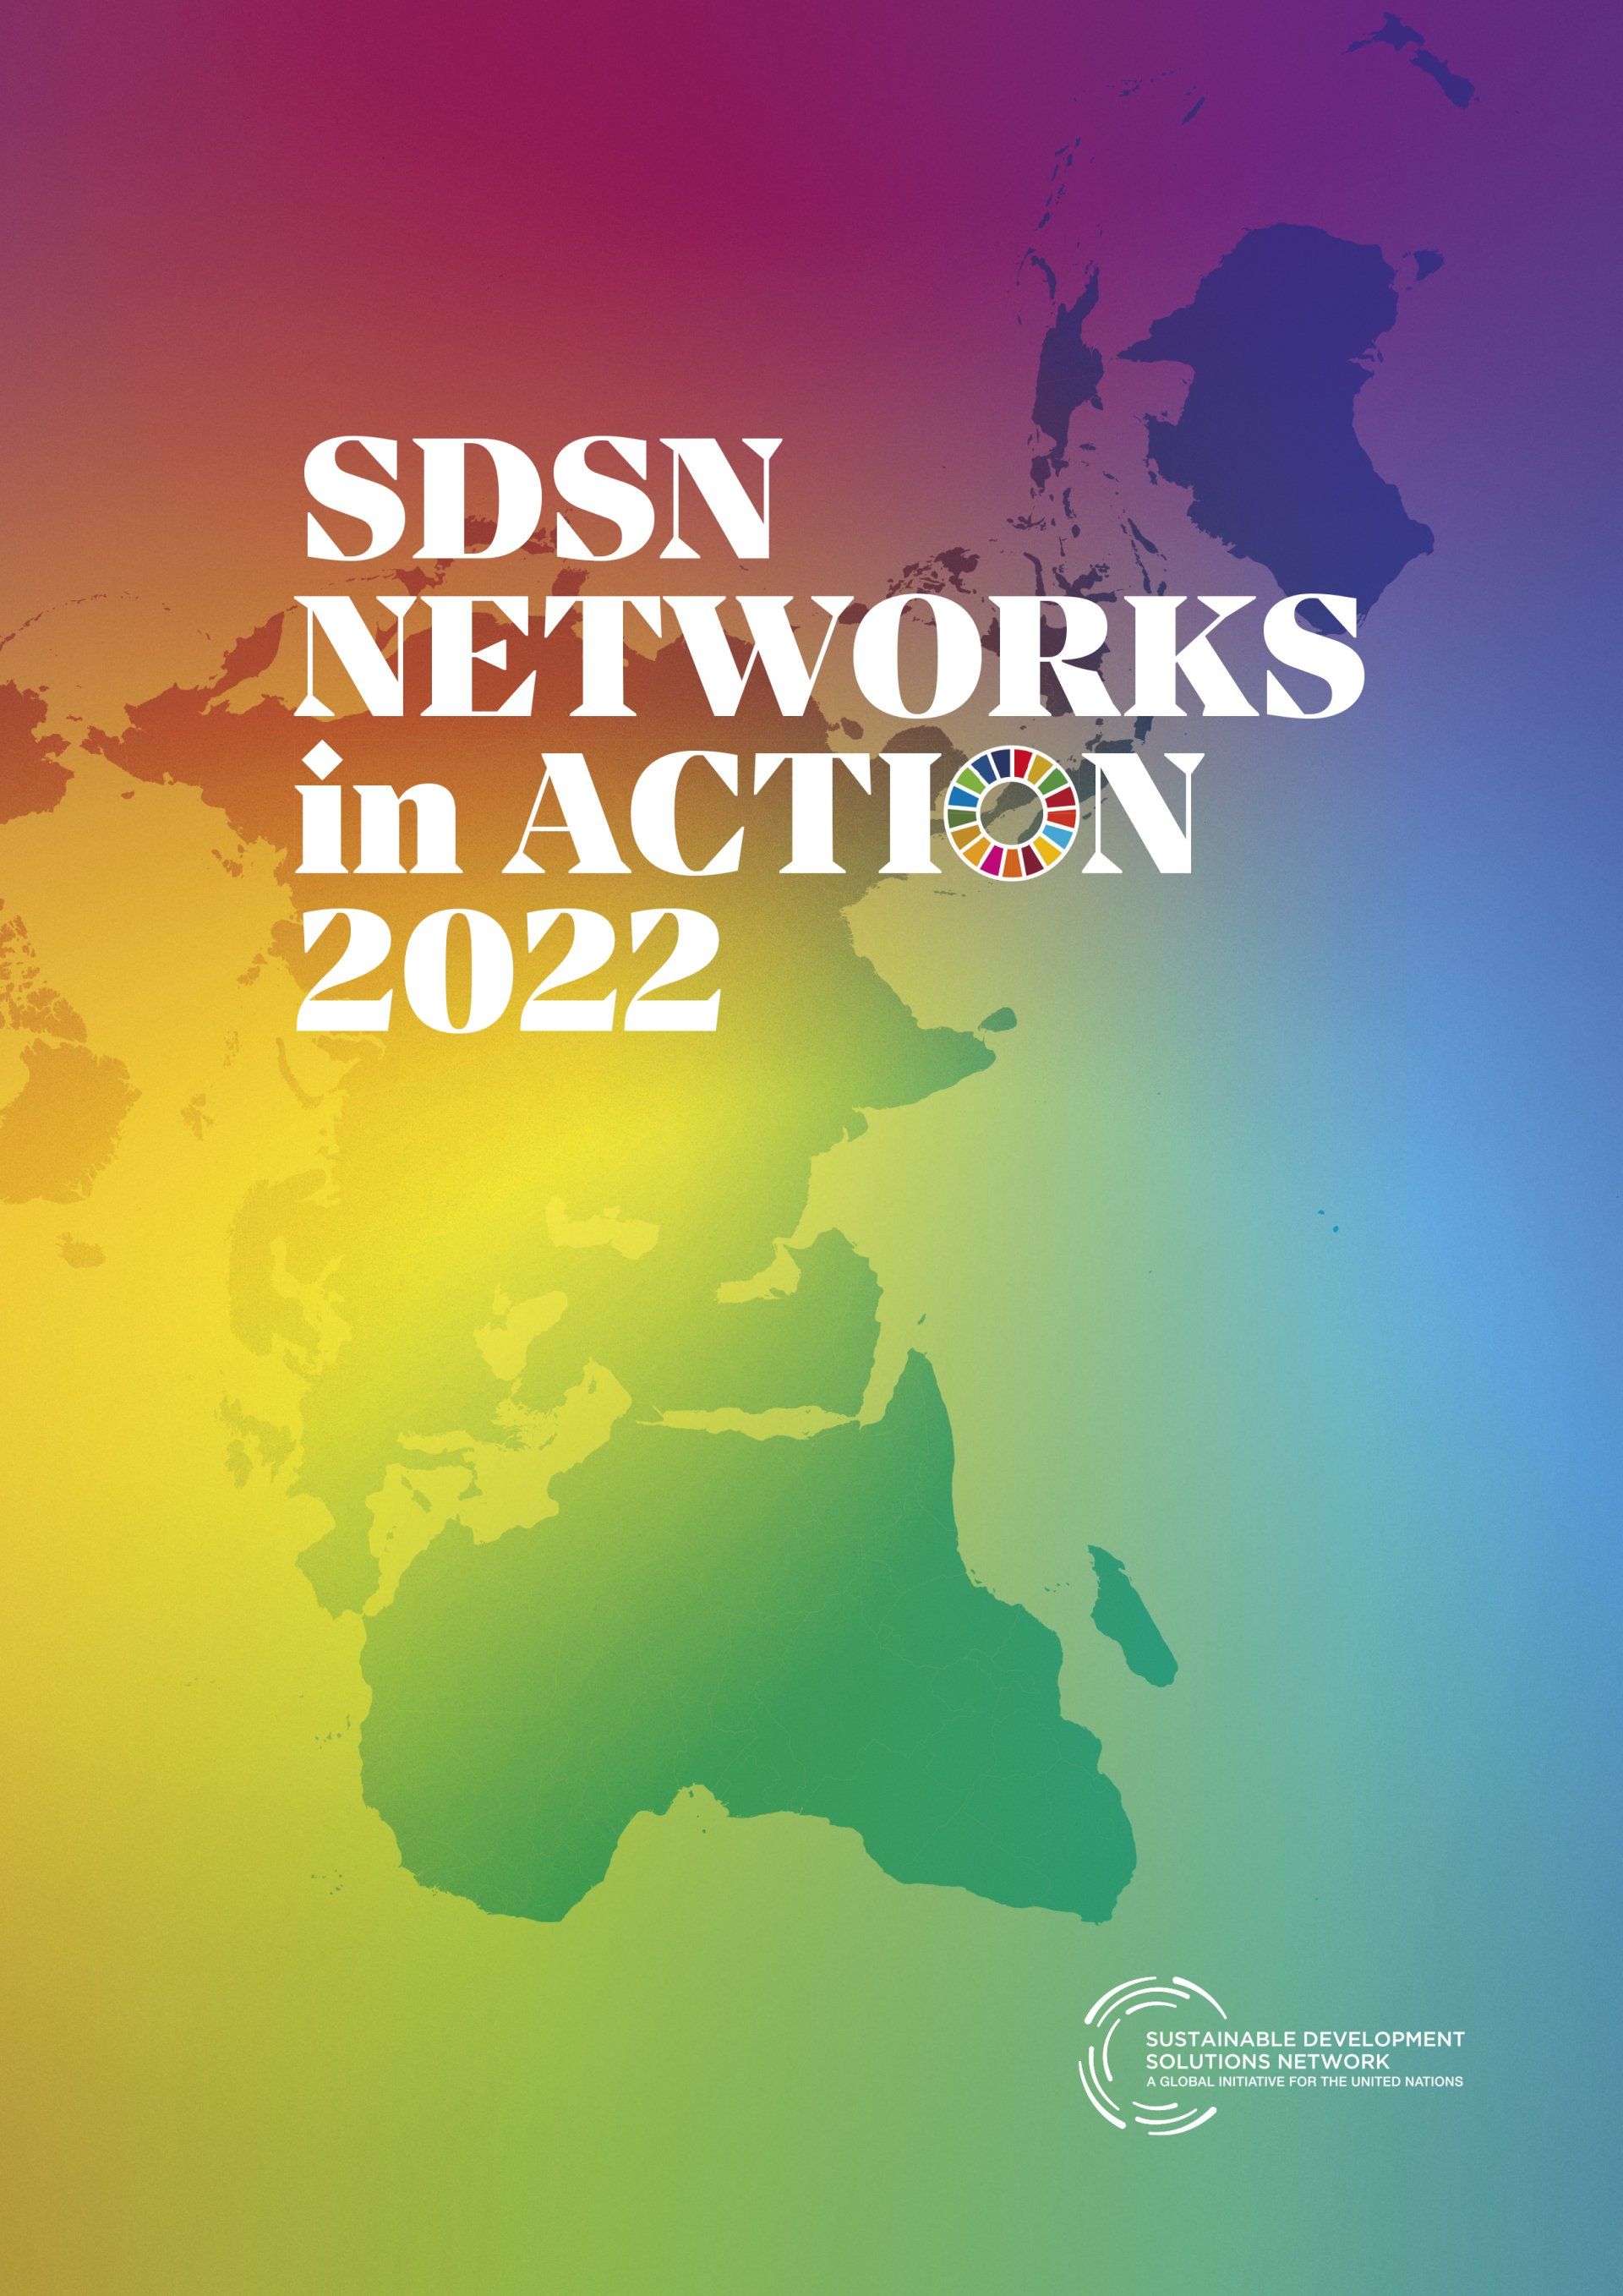 SDSN Networks in Action 2022